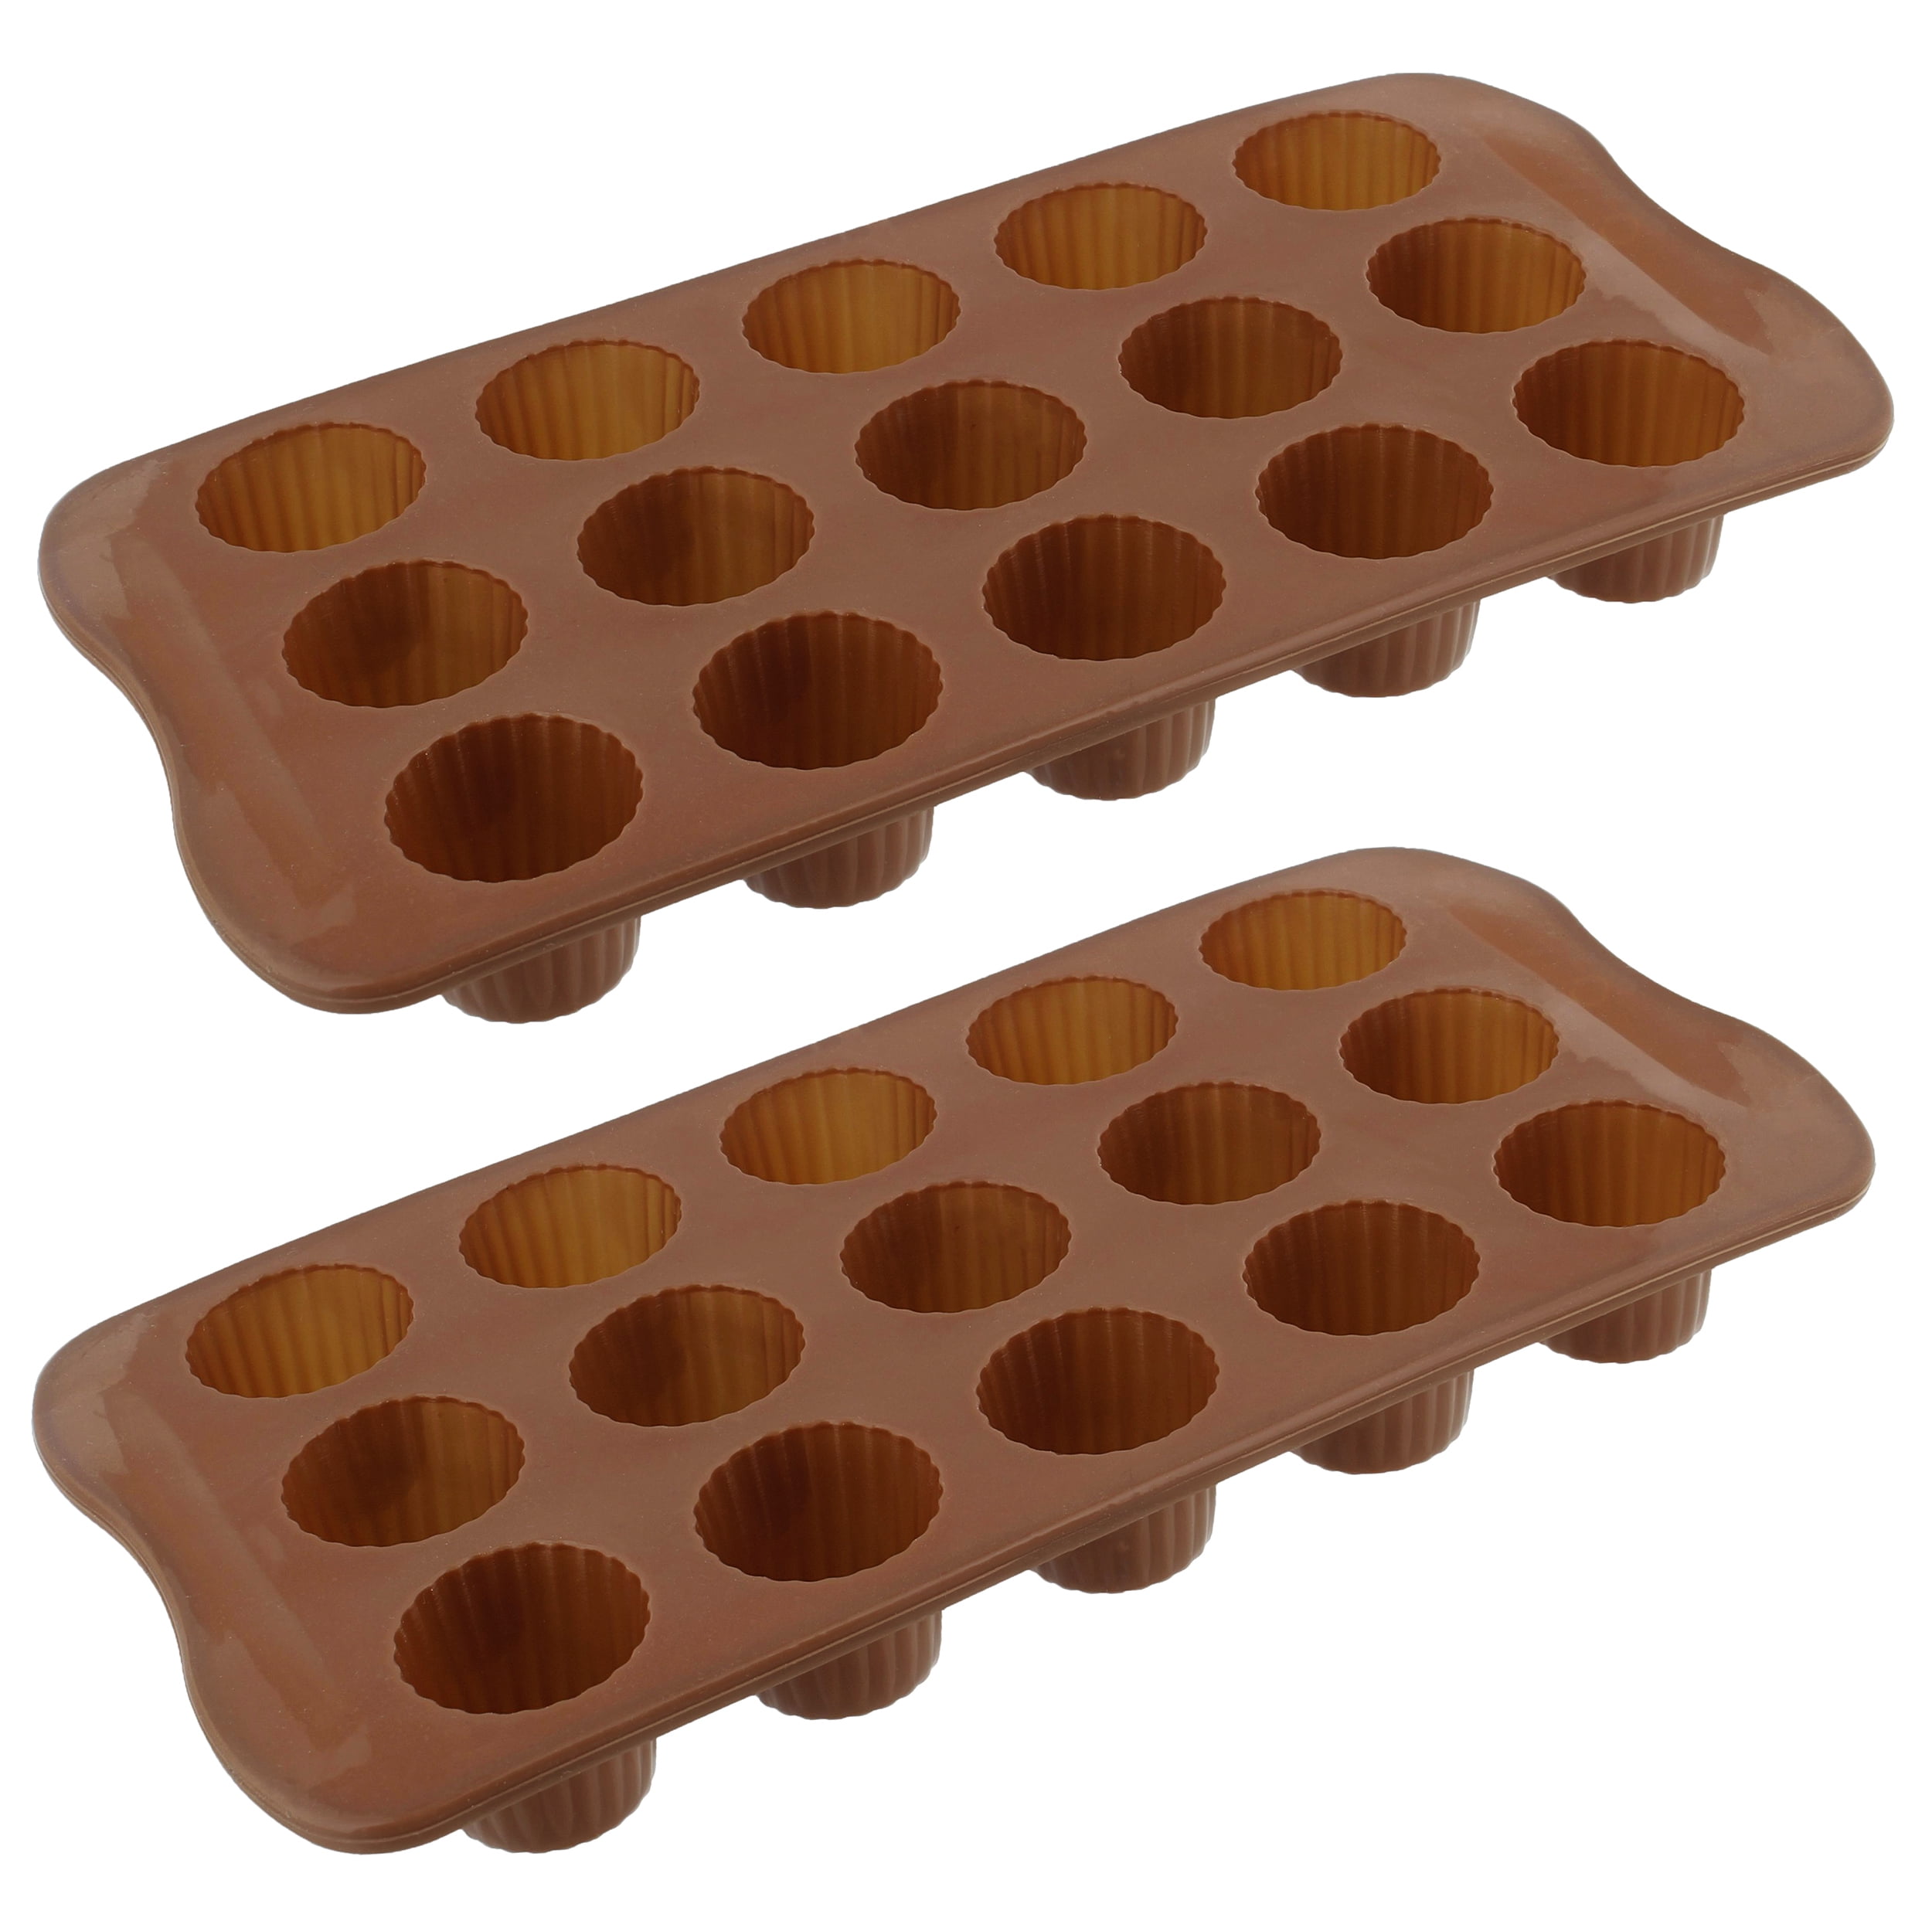 Spec101 Silicone Mold Tray 2pk - 15 Cavity Small Peanut Butter Cup Mold  Trays